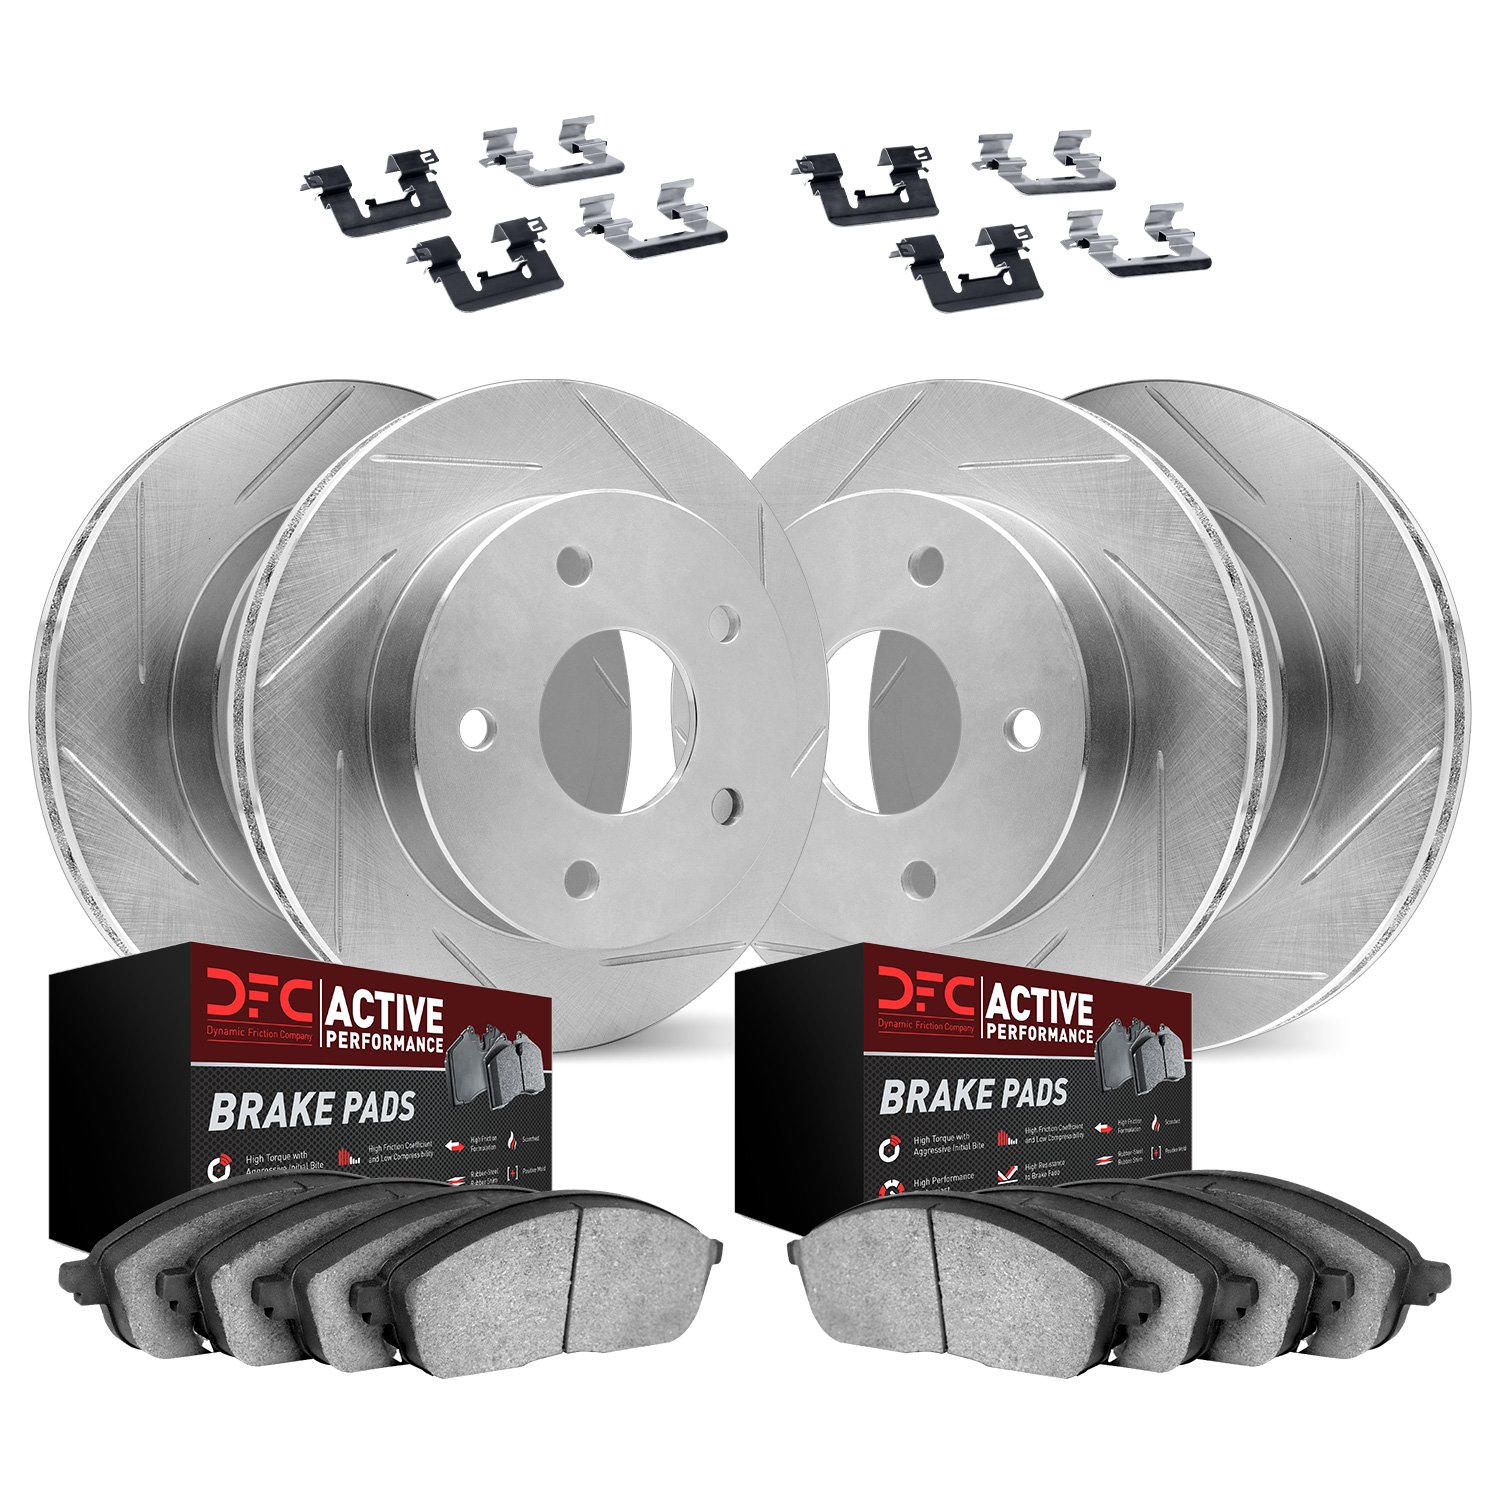 2714-46000 Geoperformance Slotted Brake Rotors with Active Performance Pads Kits & Hardware, 1997-2004 GM, Position: Front and R